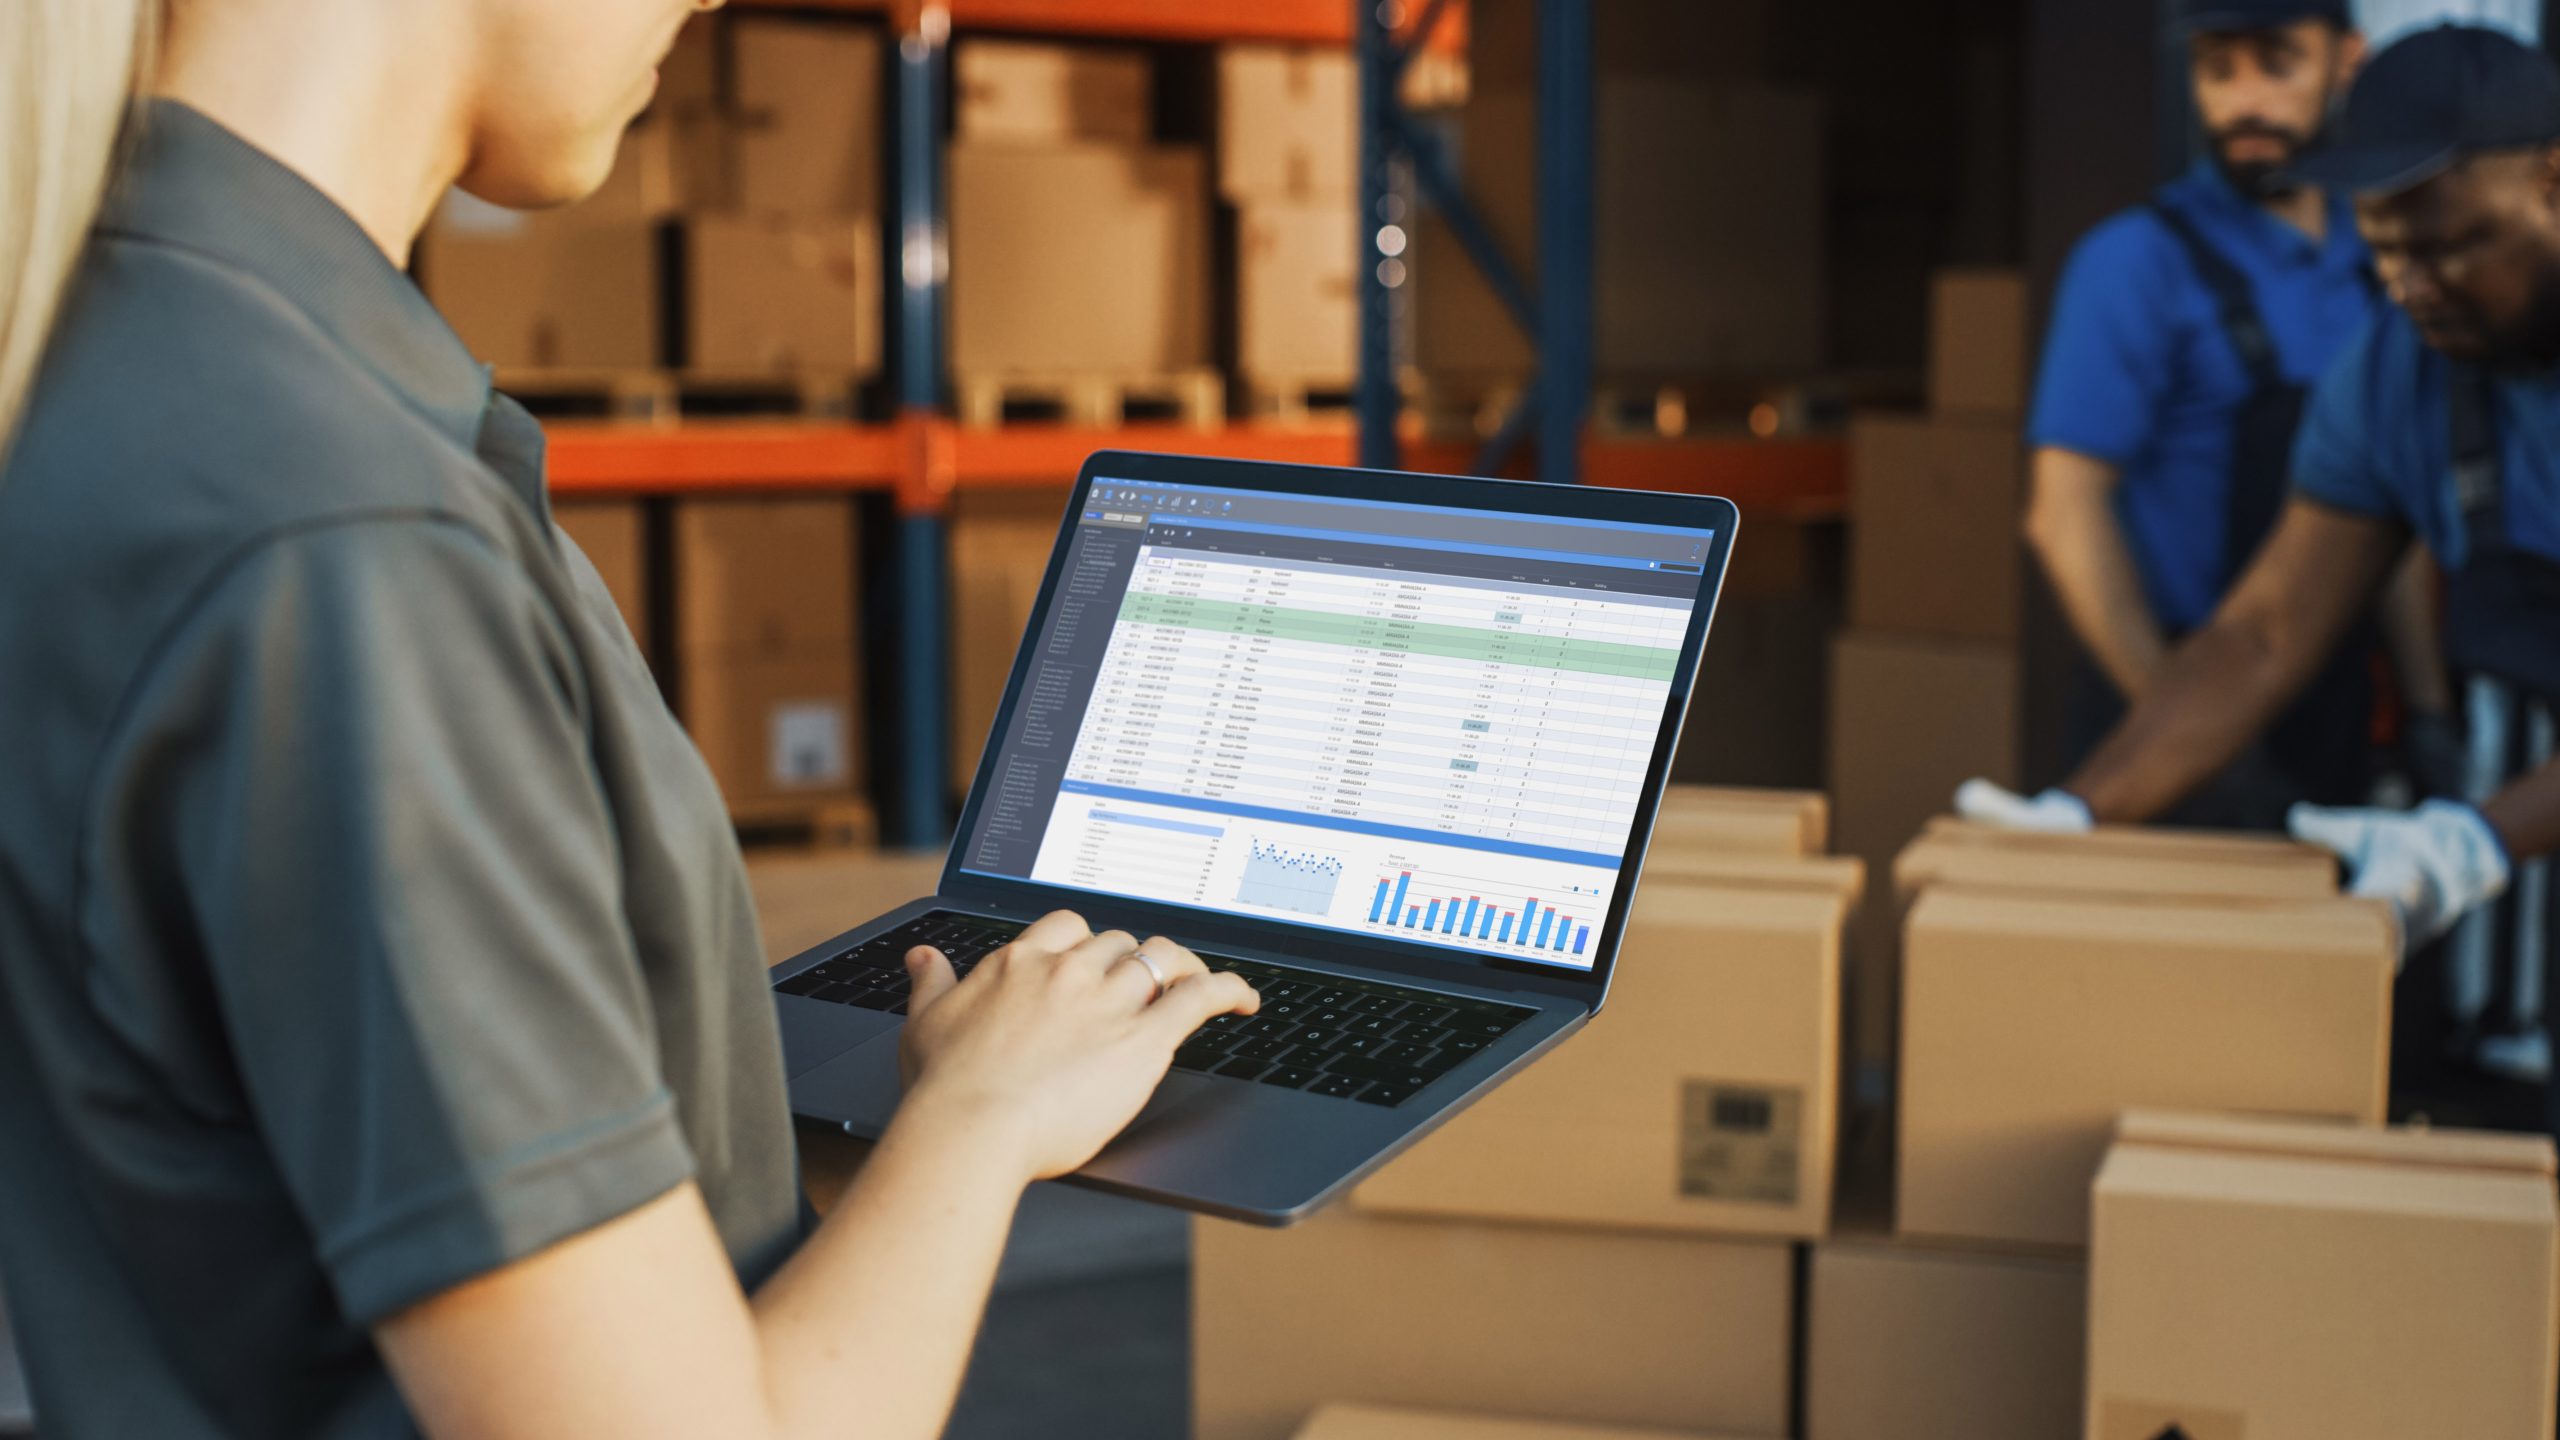 Female shipping manager uses laptop comouter to check inventory levels